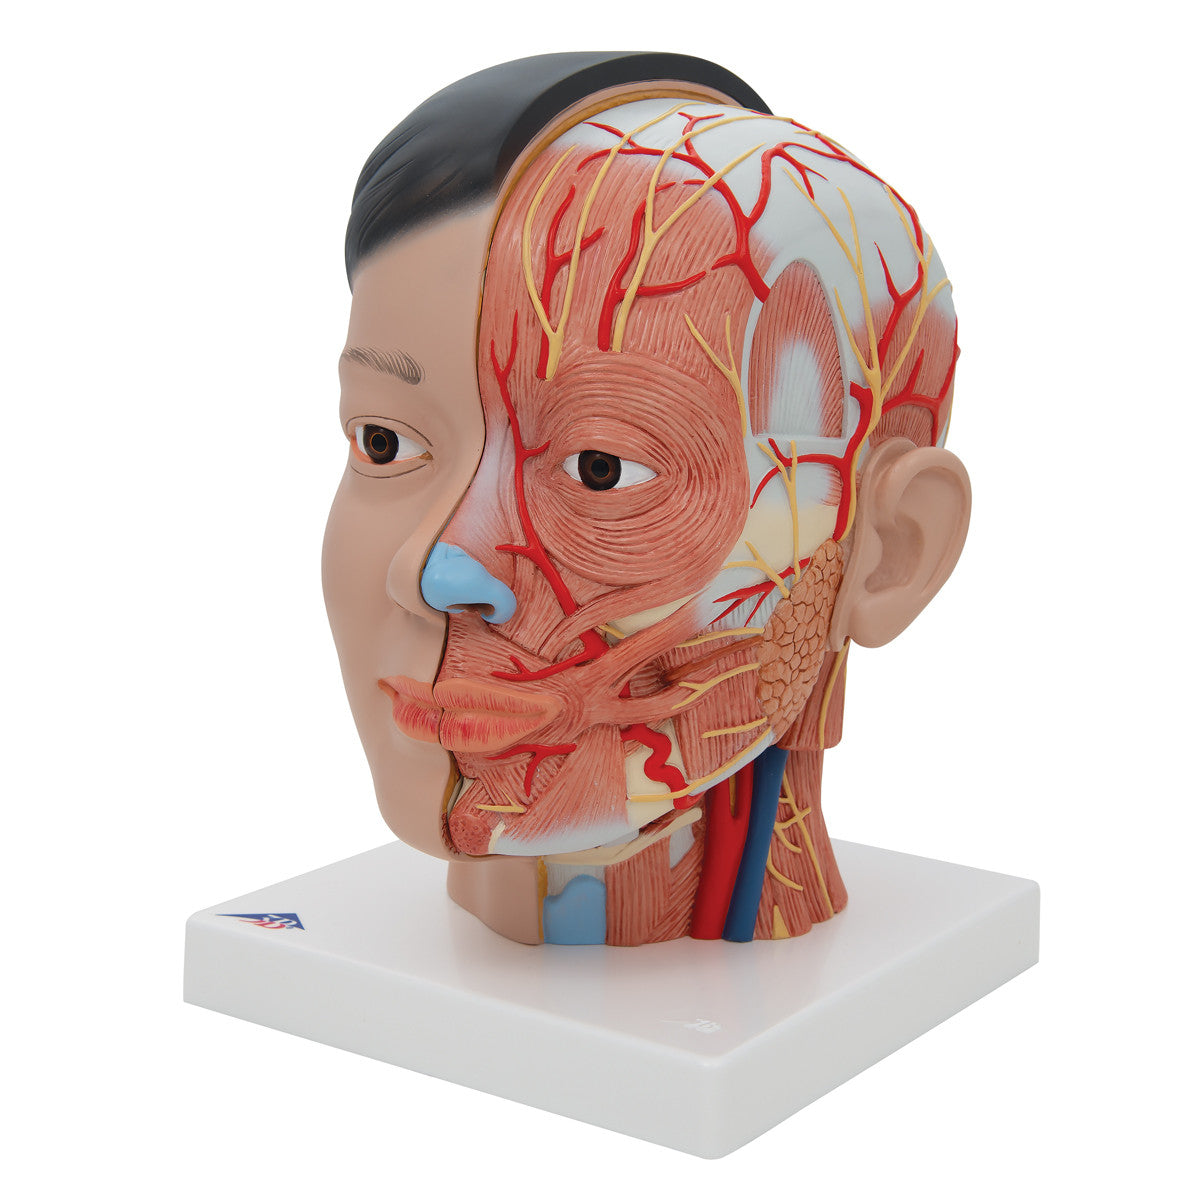 Asian Deluxe Head Model with Neck, 4 part | 3B Scientific C06 | Candent - muscular